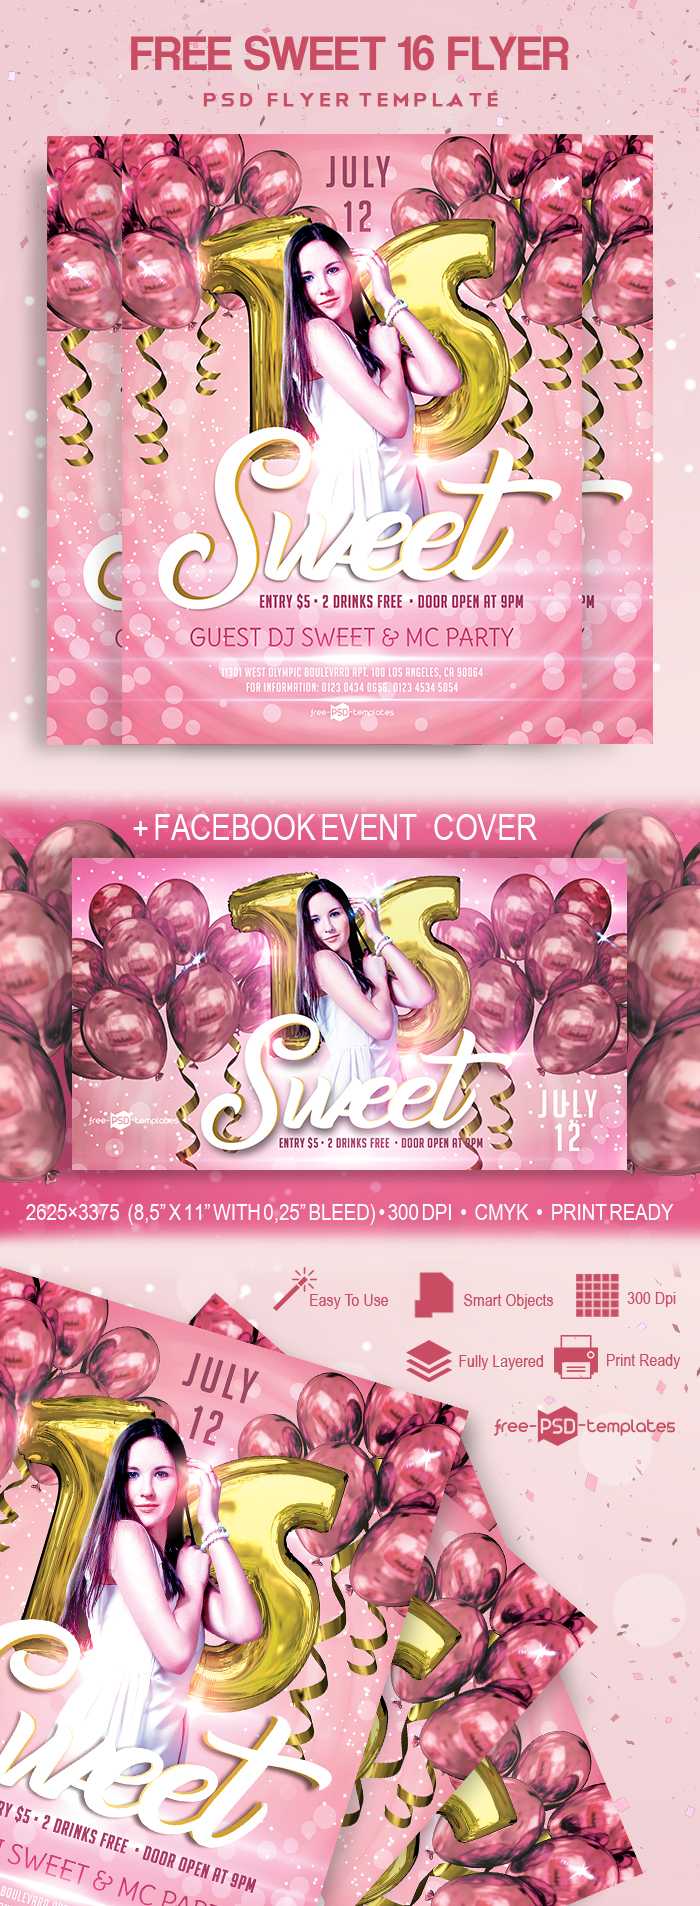 Free Sweet 16 Flyer In Psd | Free Psd Templates With Regard To Sweet 16 Banner Template